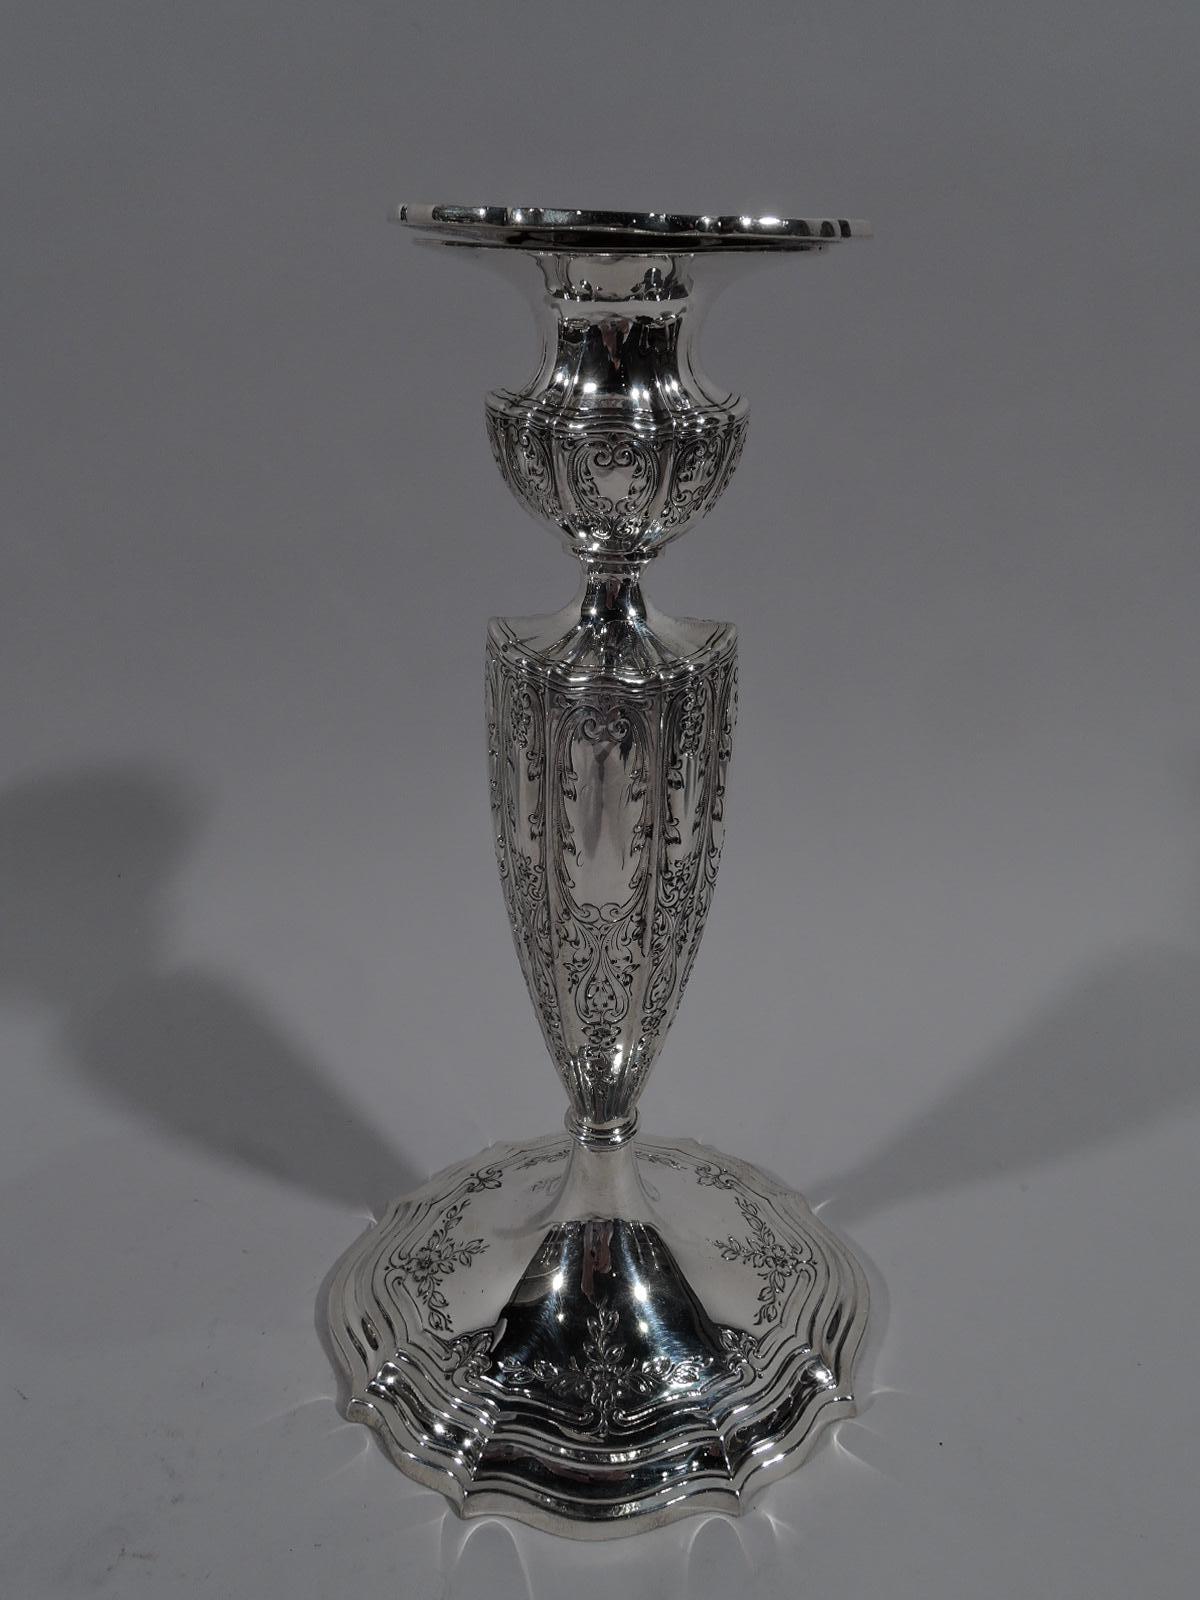 Pair of Edwardian Regency sterling silver candlesticks, circa 1910. Each: Ovoid with lobed shaft on raised and stepped foot; socket bellied with detachable bobeche. Bobeche and foot rim have scrolled rims. Engraved scrolling ornament with flowers